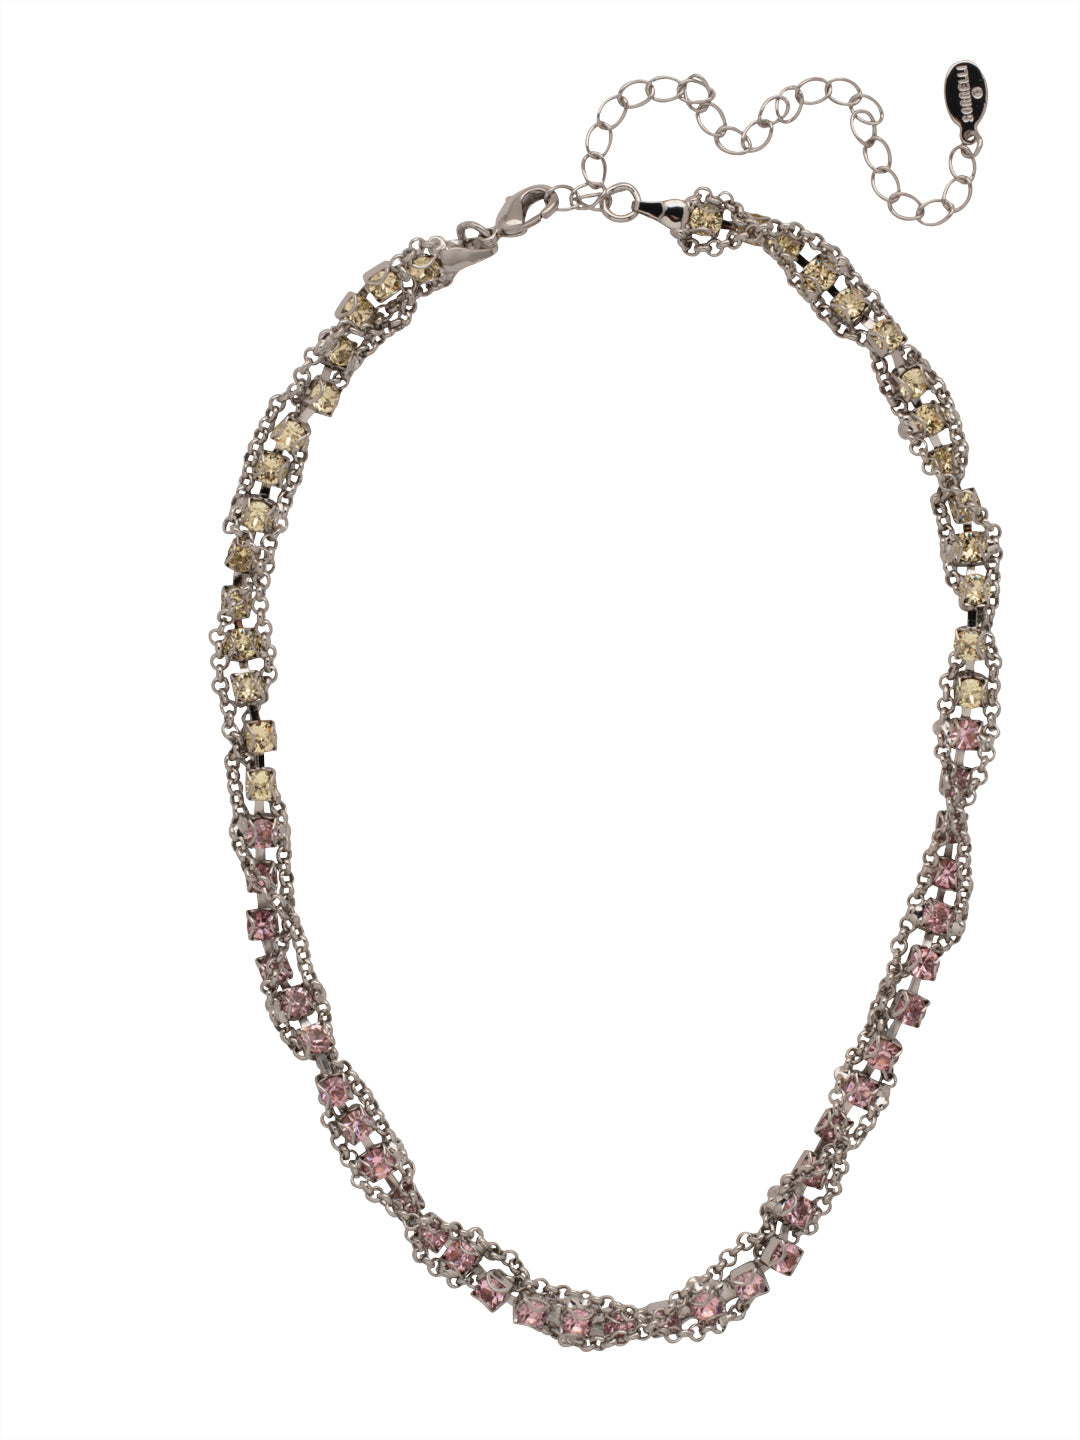 Brandi Classic Tennis Necklace - NFC60PDPPN - <p>The Brandi Classic Tennis Necklace features a timeless crystal lined necklace, elevated with a braided chain design. From Sorrelli's Pink Pineapple collection in our Palladium finish.</p>